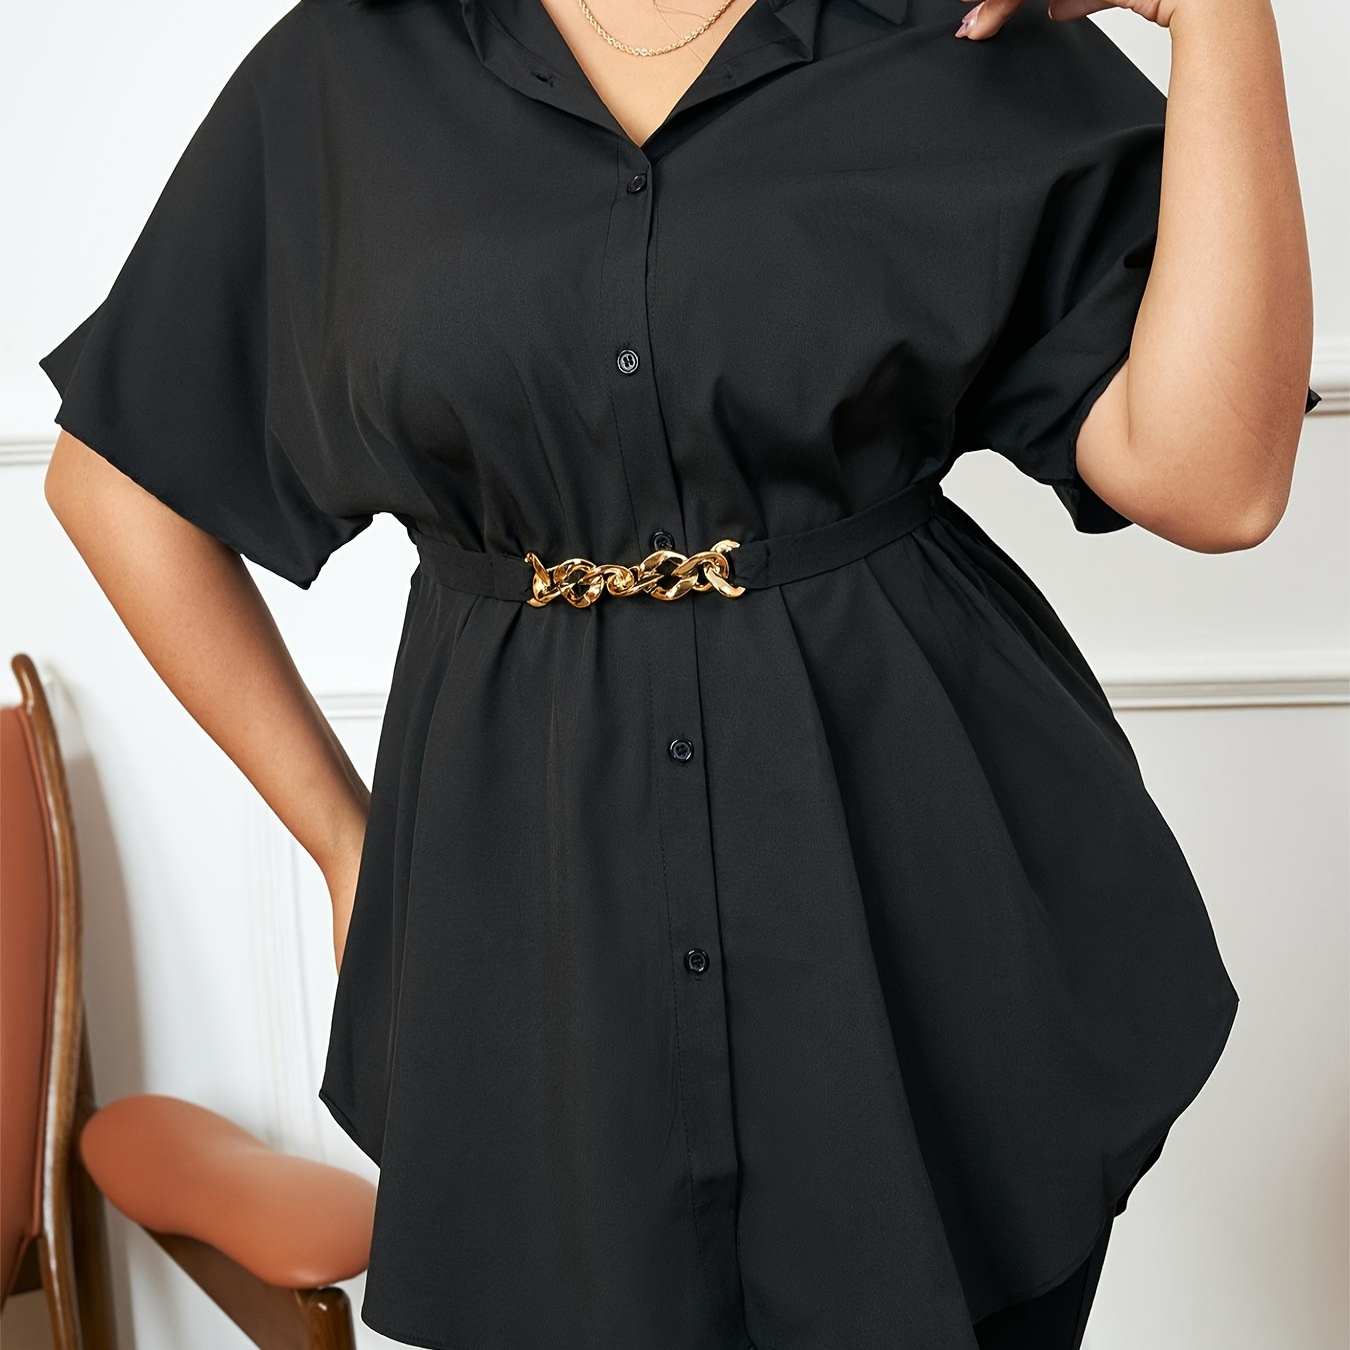 

Plus Size Casual Blouse, Women's Plus Solid Chain Decor Button Up Batwing Sleeve Lapel Collar Tunic Shirt Top